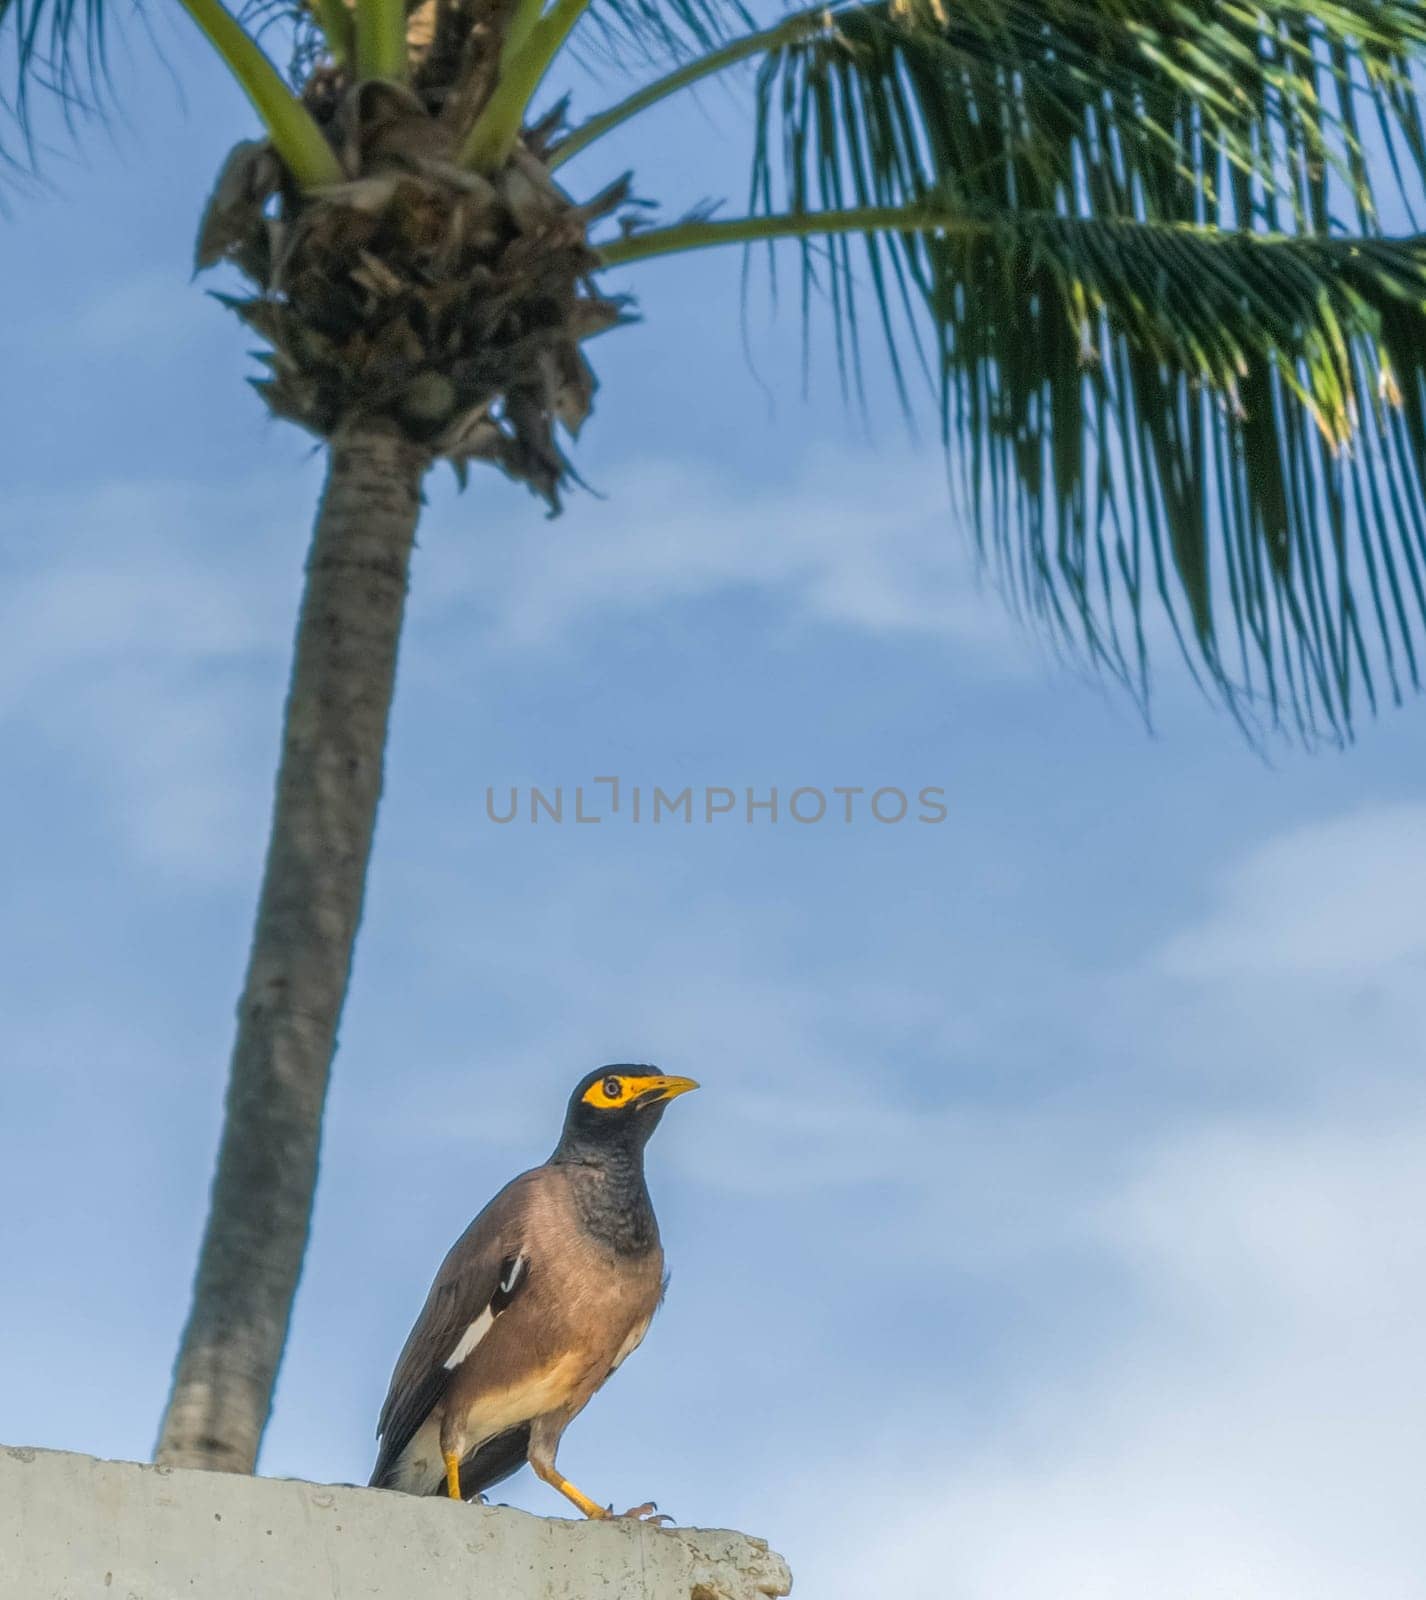 Common myna or Indian myna, Acridotheres tristis, standing on a rock under a palm tree in Phuket, Thailand